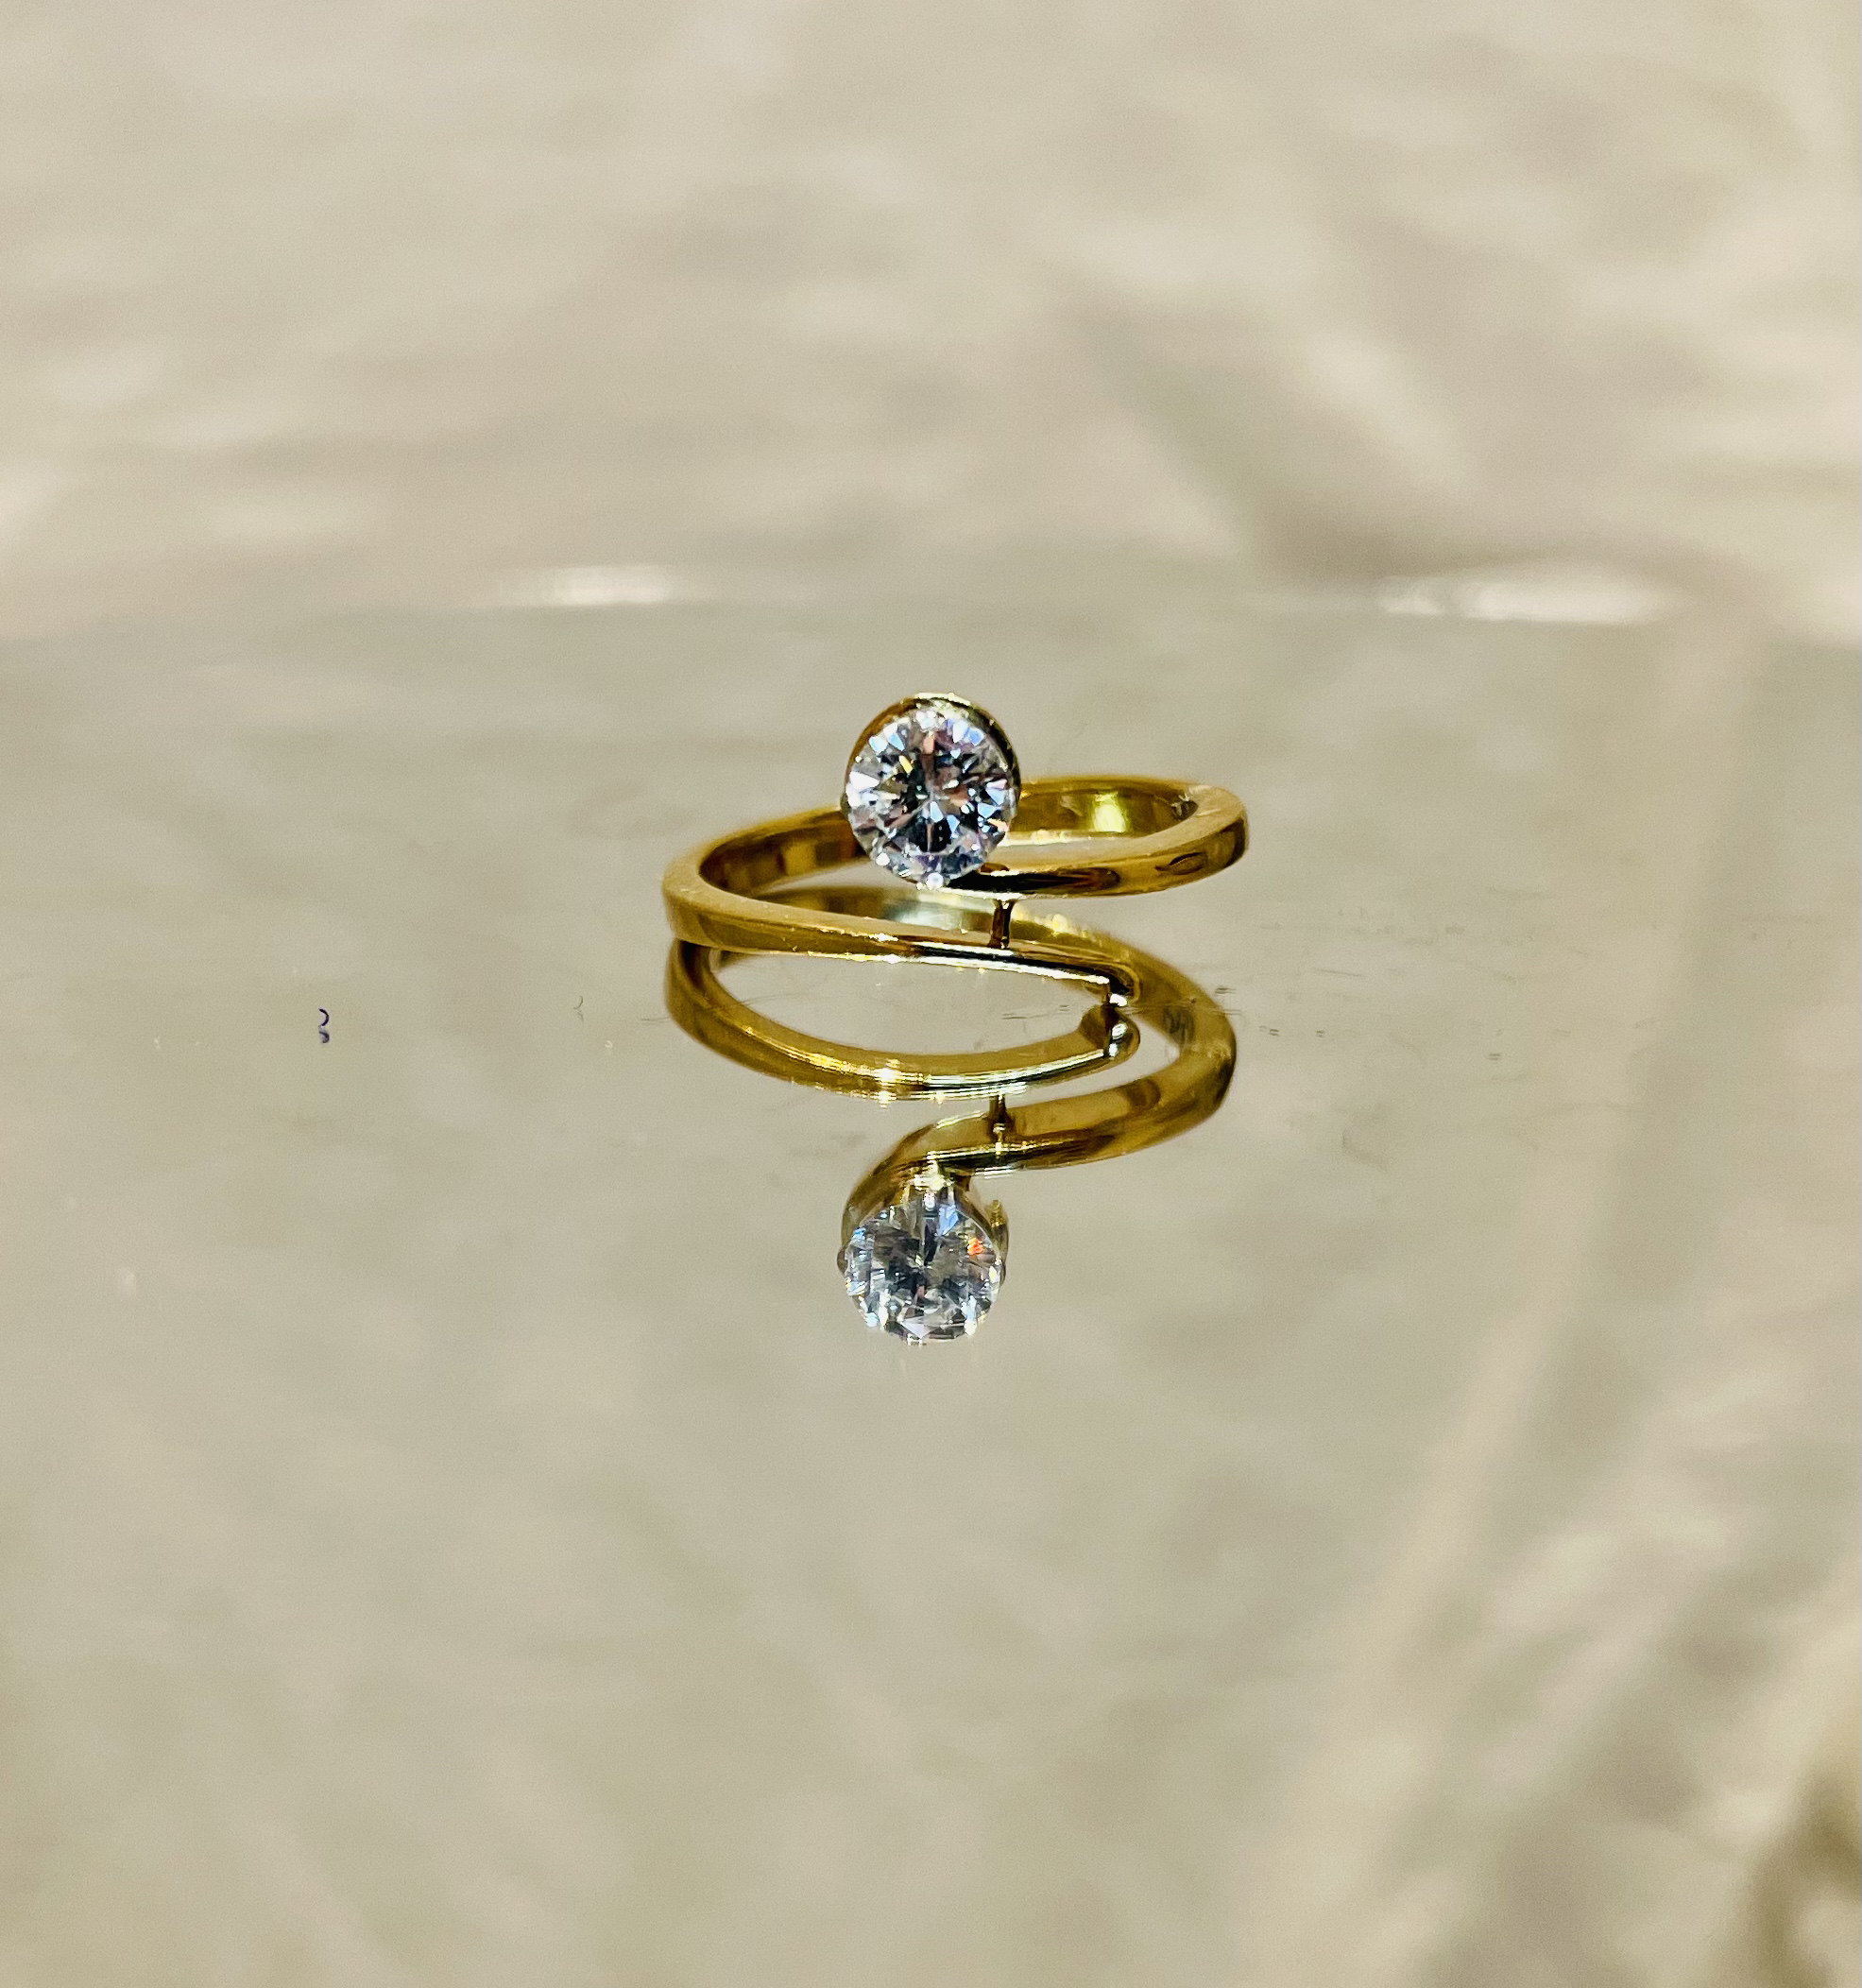 Beautiful Natural 0.30 CT VVS Diamond Ring With 18k Gold - Image 2 of 3